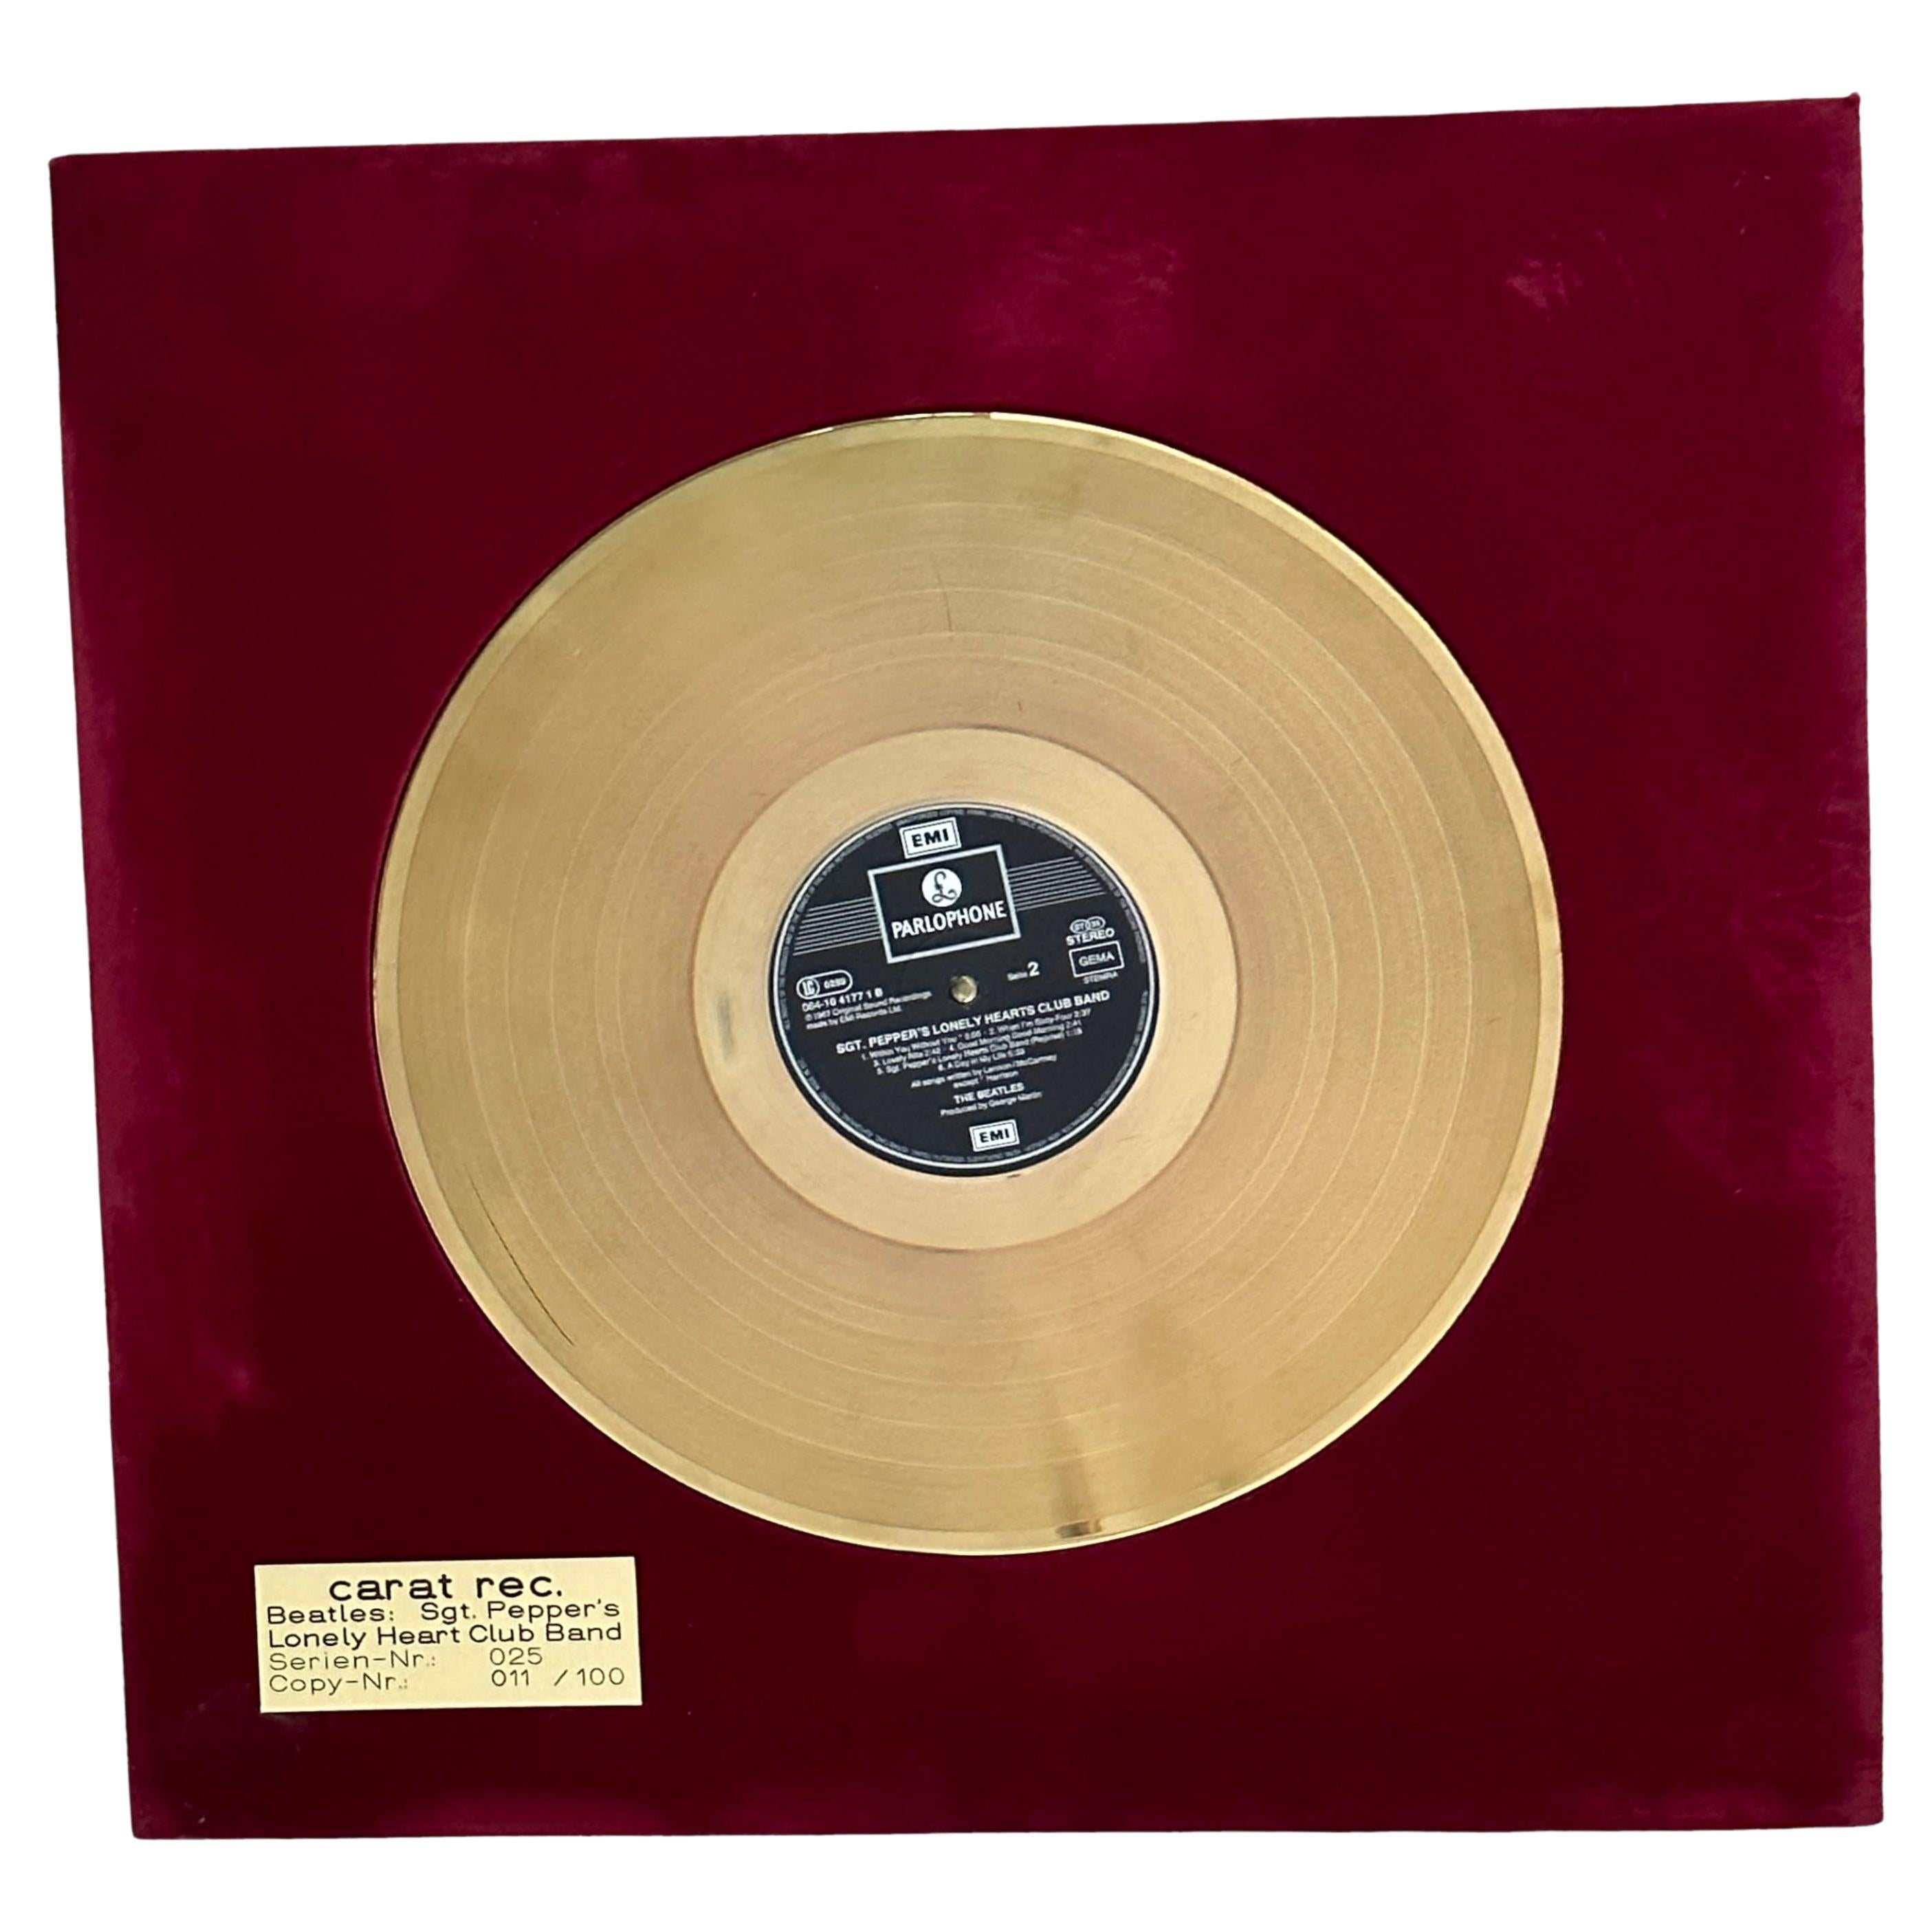 Beatles Sgt. Peppers Lonely Hearts Club Band Golden Record Carat Rec 011/100 For Sale